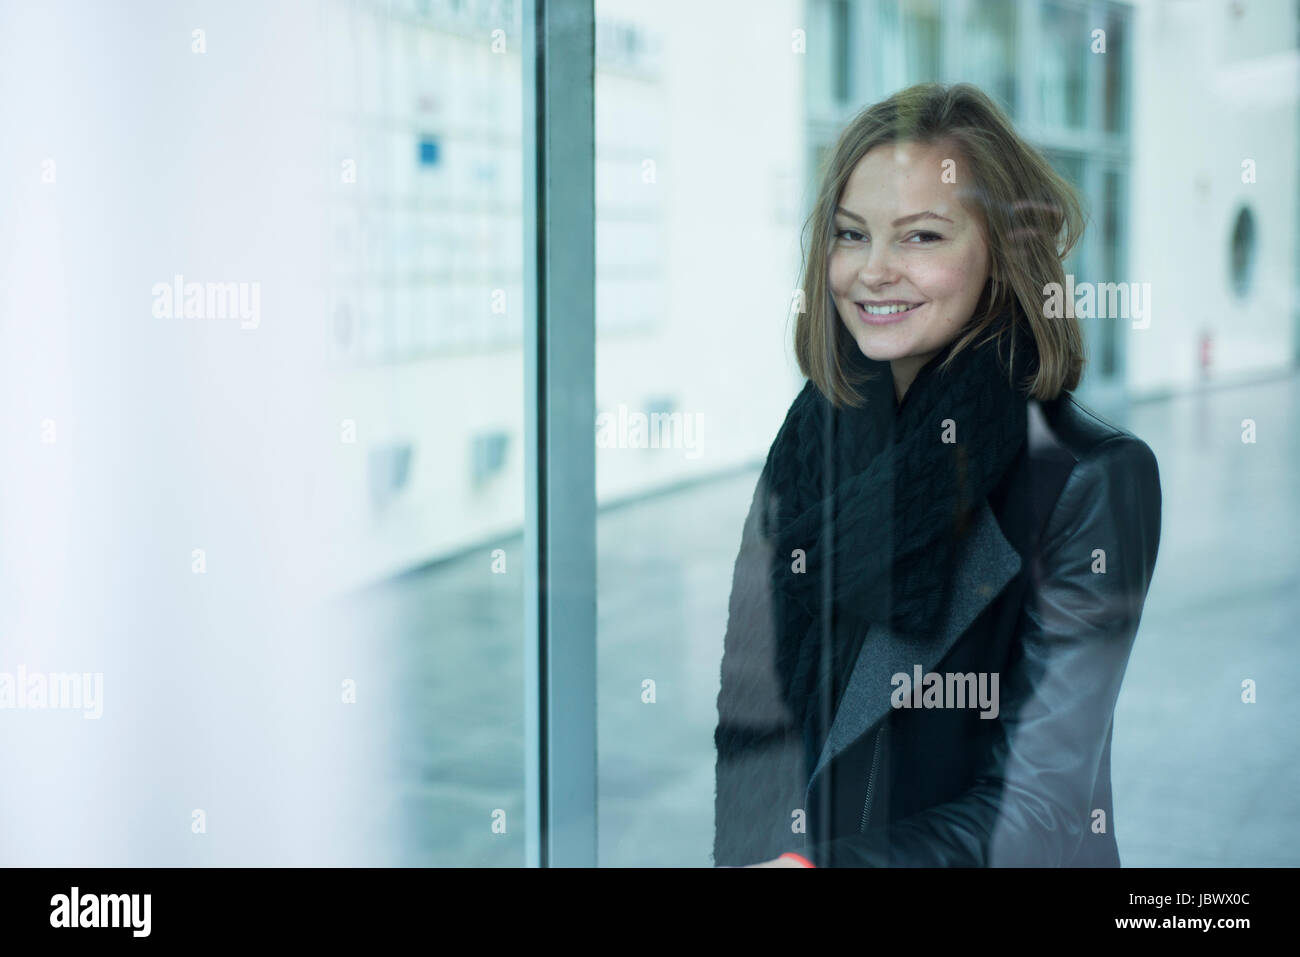 Office window portrait of happy young woman Stock Photo